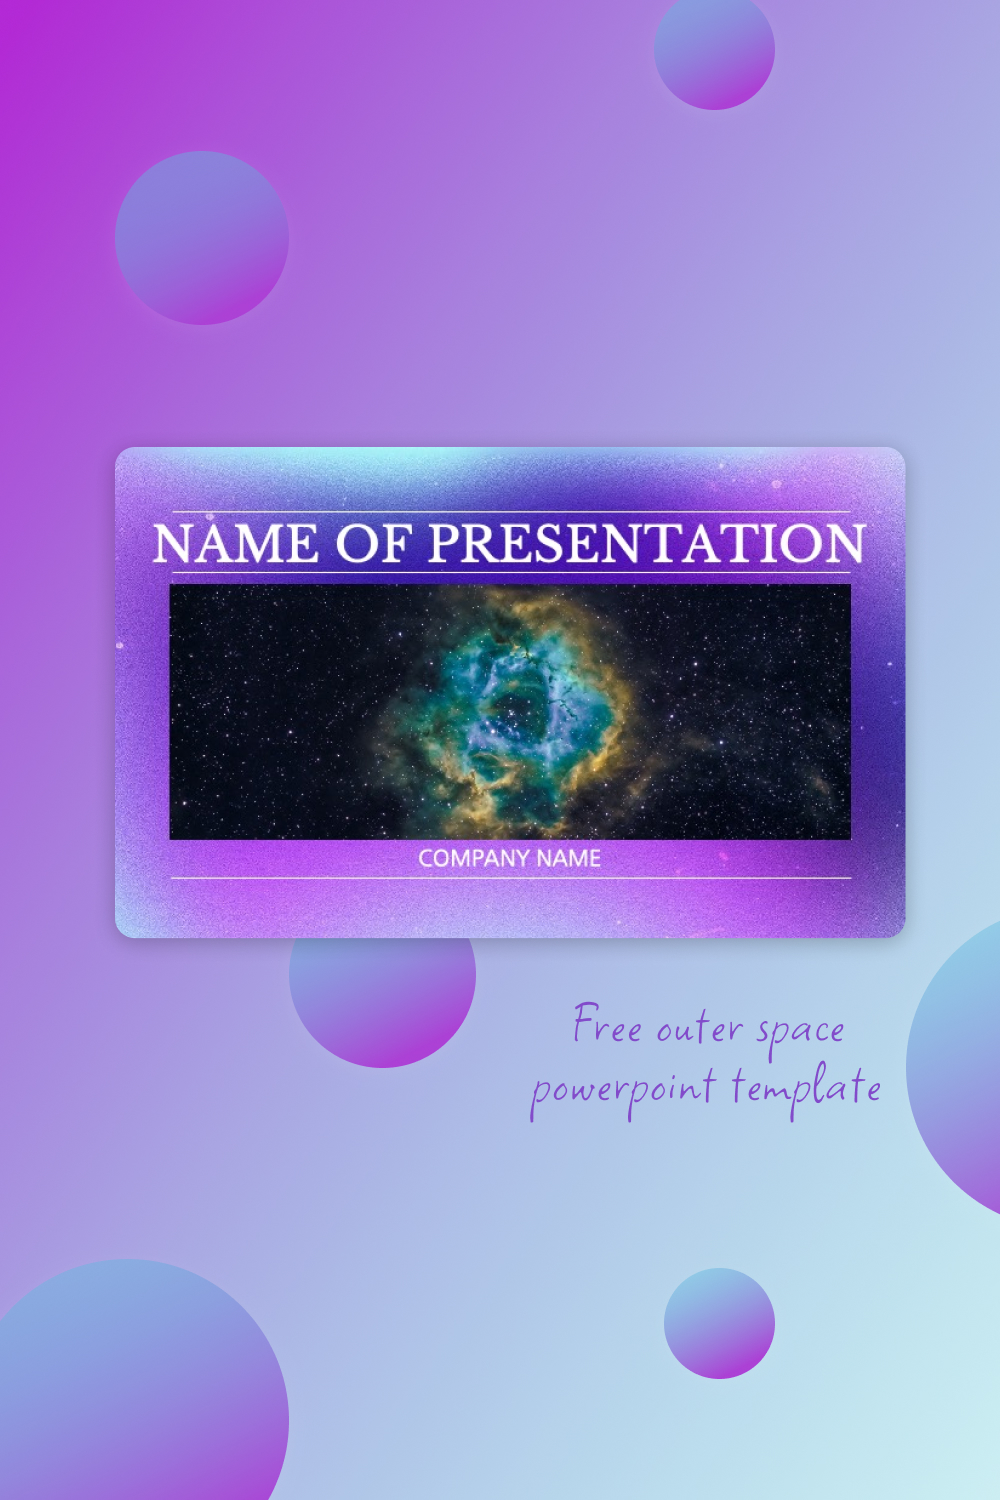 Outer space powerpoint template of pinterest.